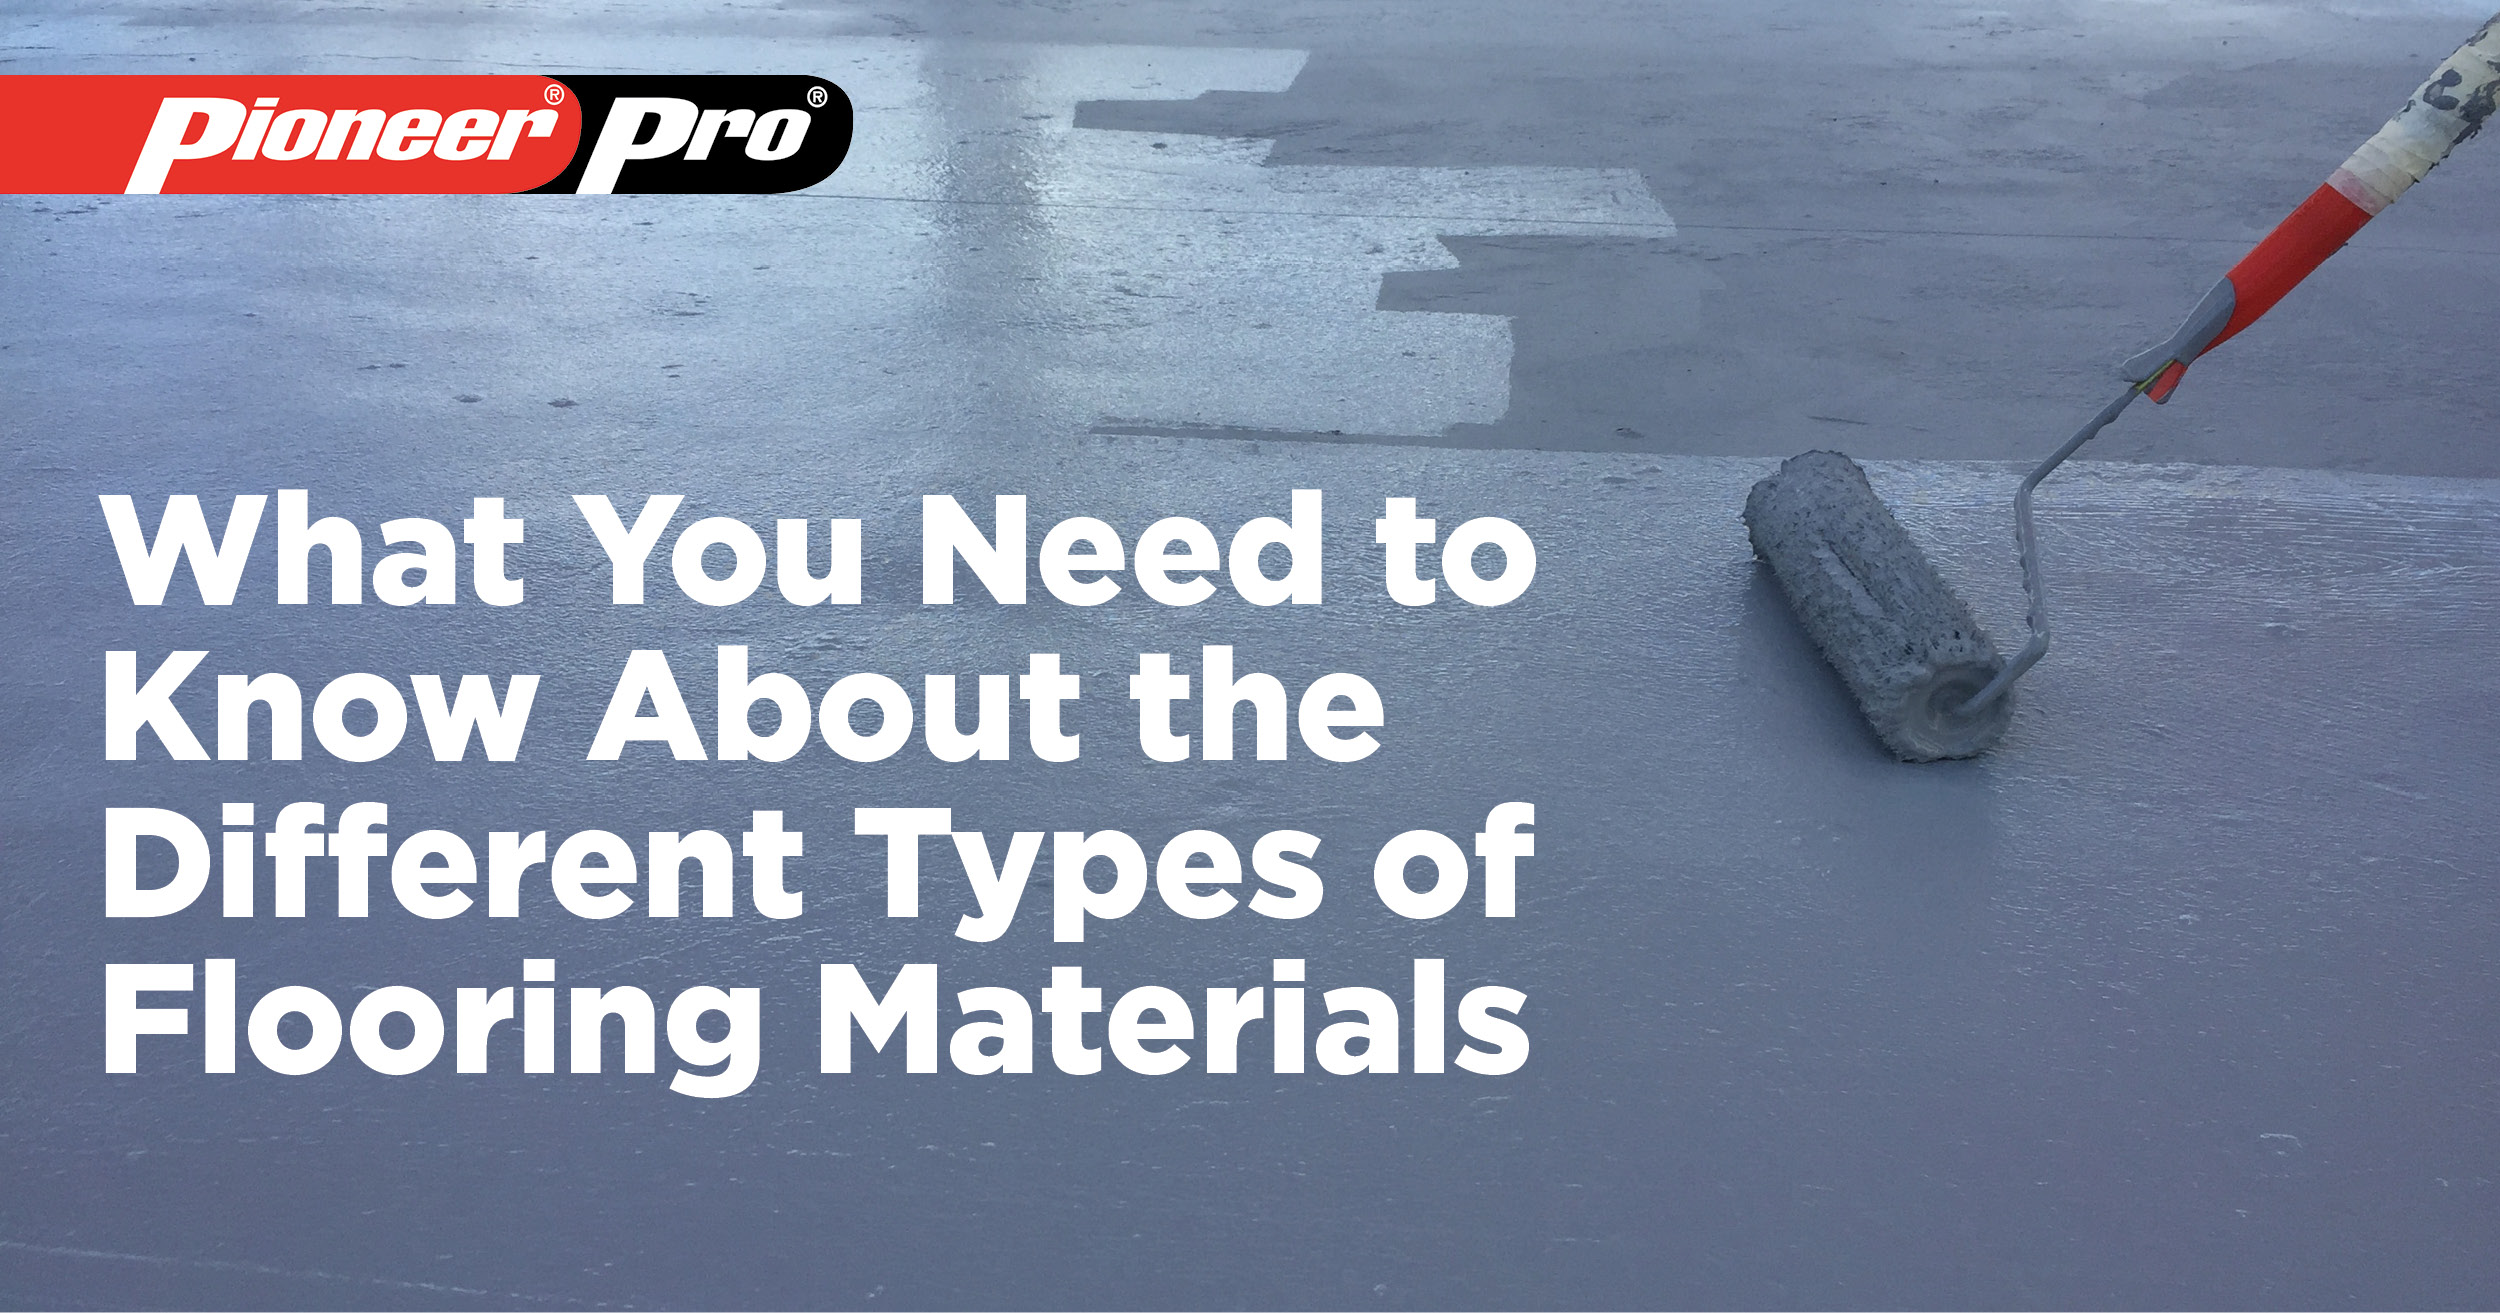 Flooring Materials and Common Causes of Damage You Need to Know